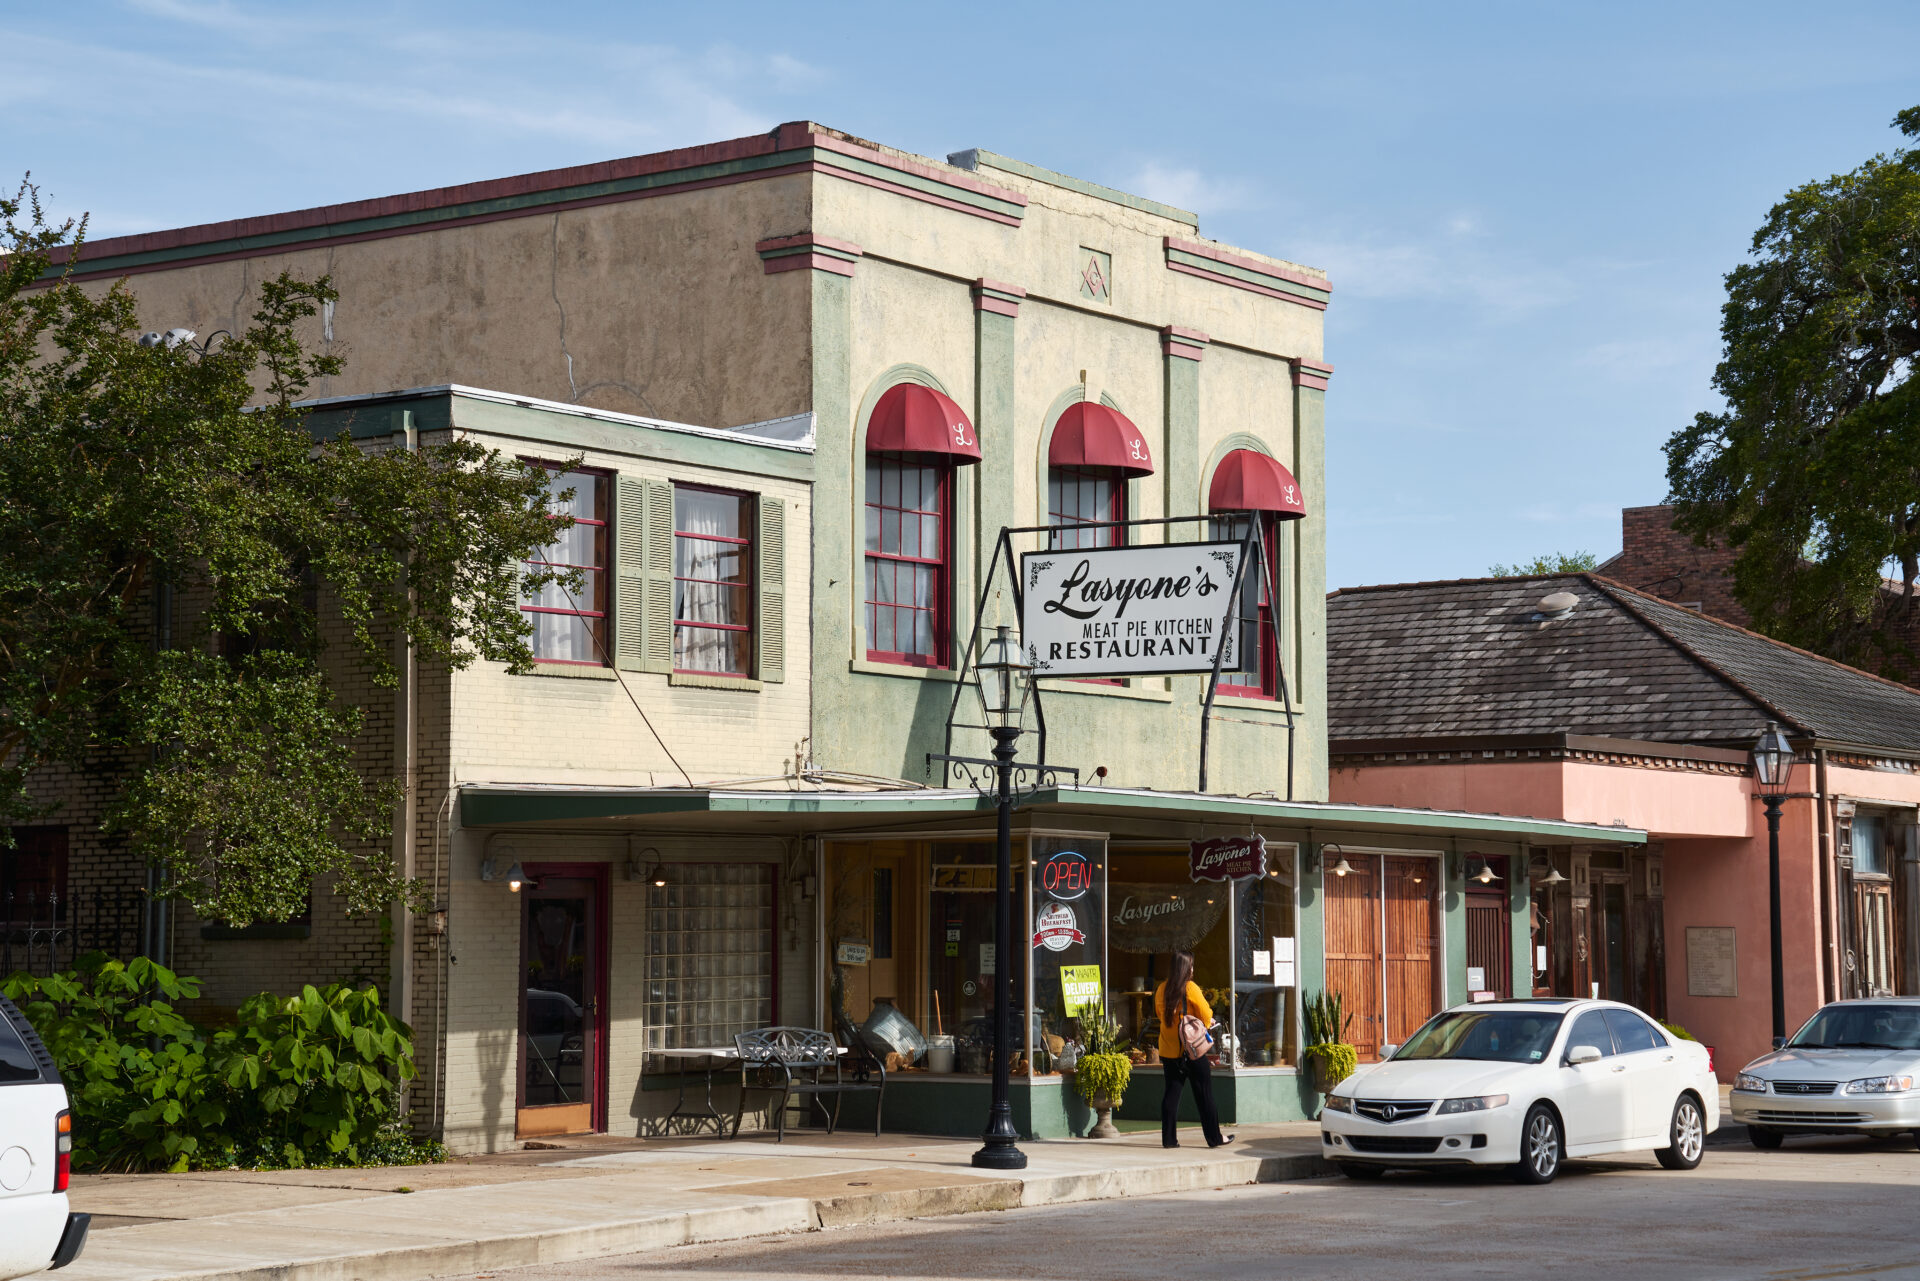 Downtown Natchitoches featuring Lasyone's restaurant 